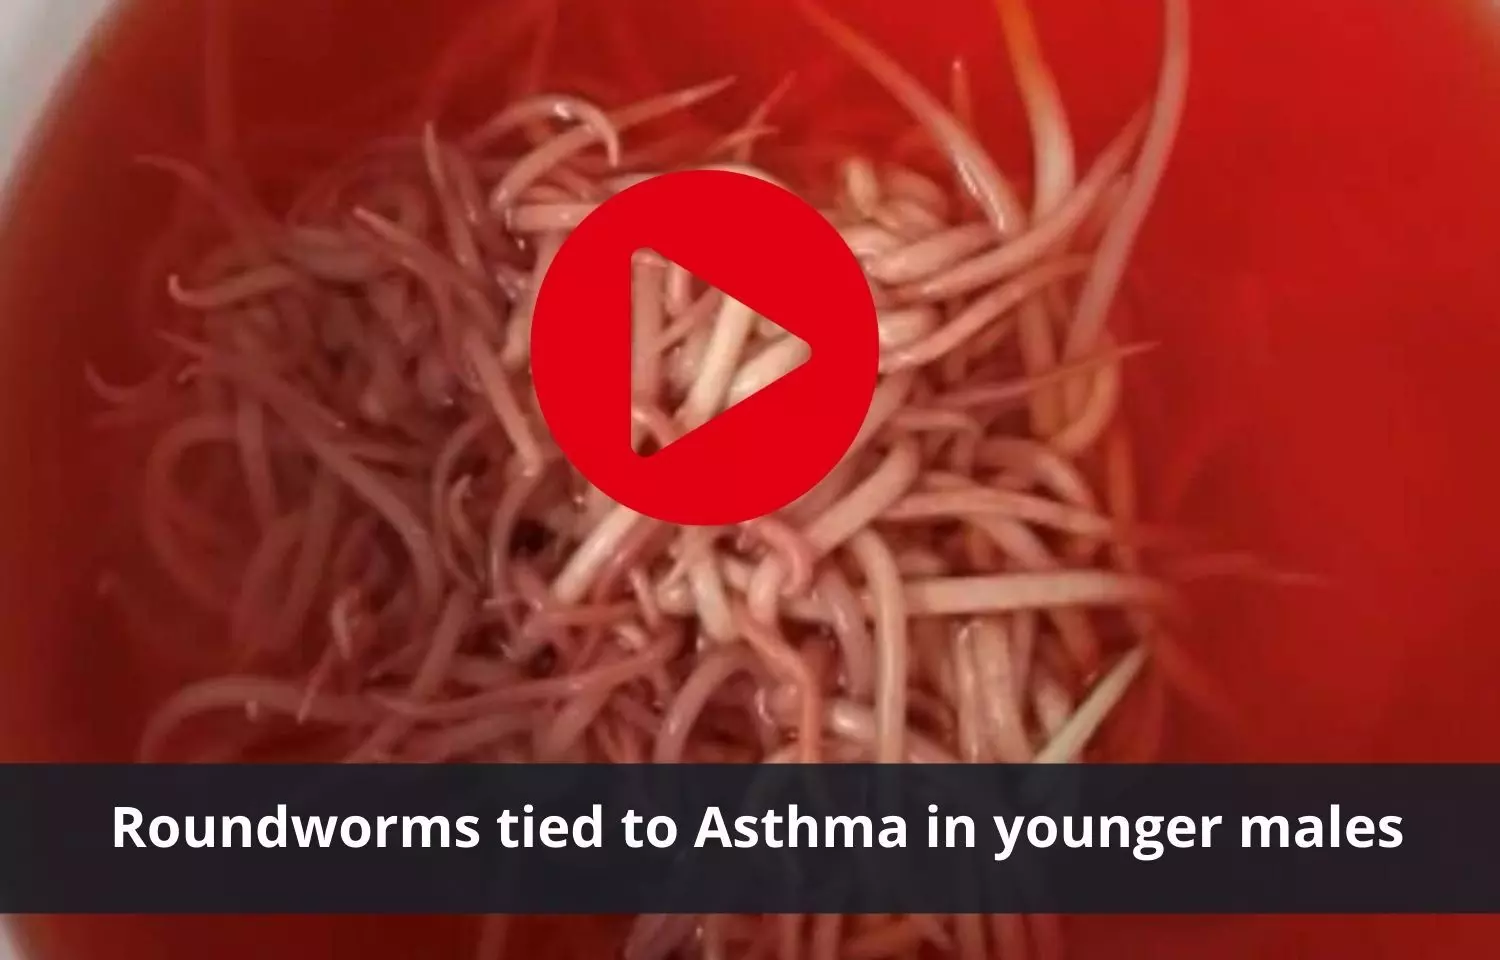 Asthma in younger males reduced by roundworms